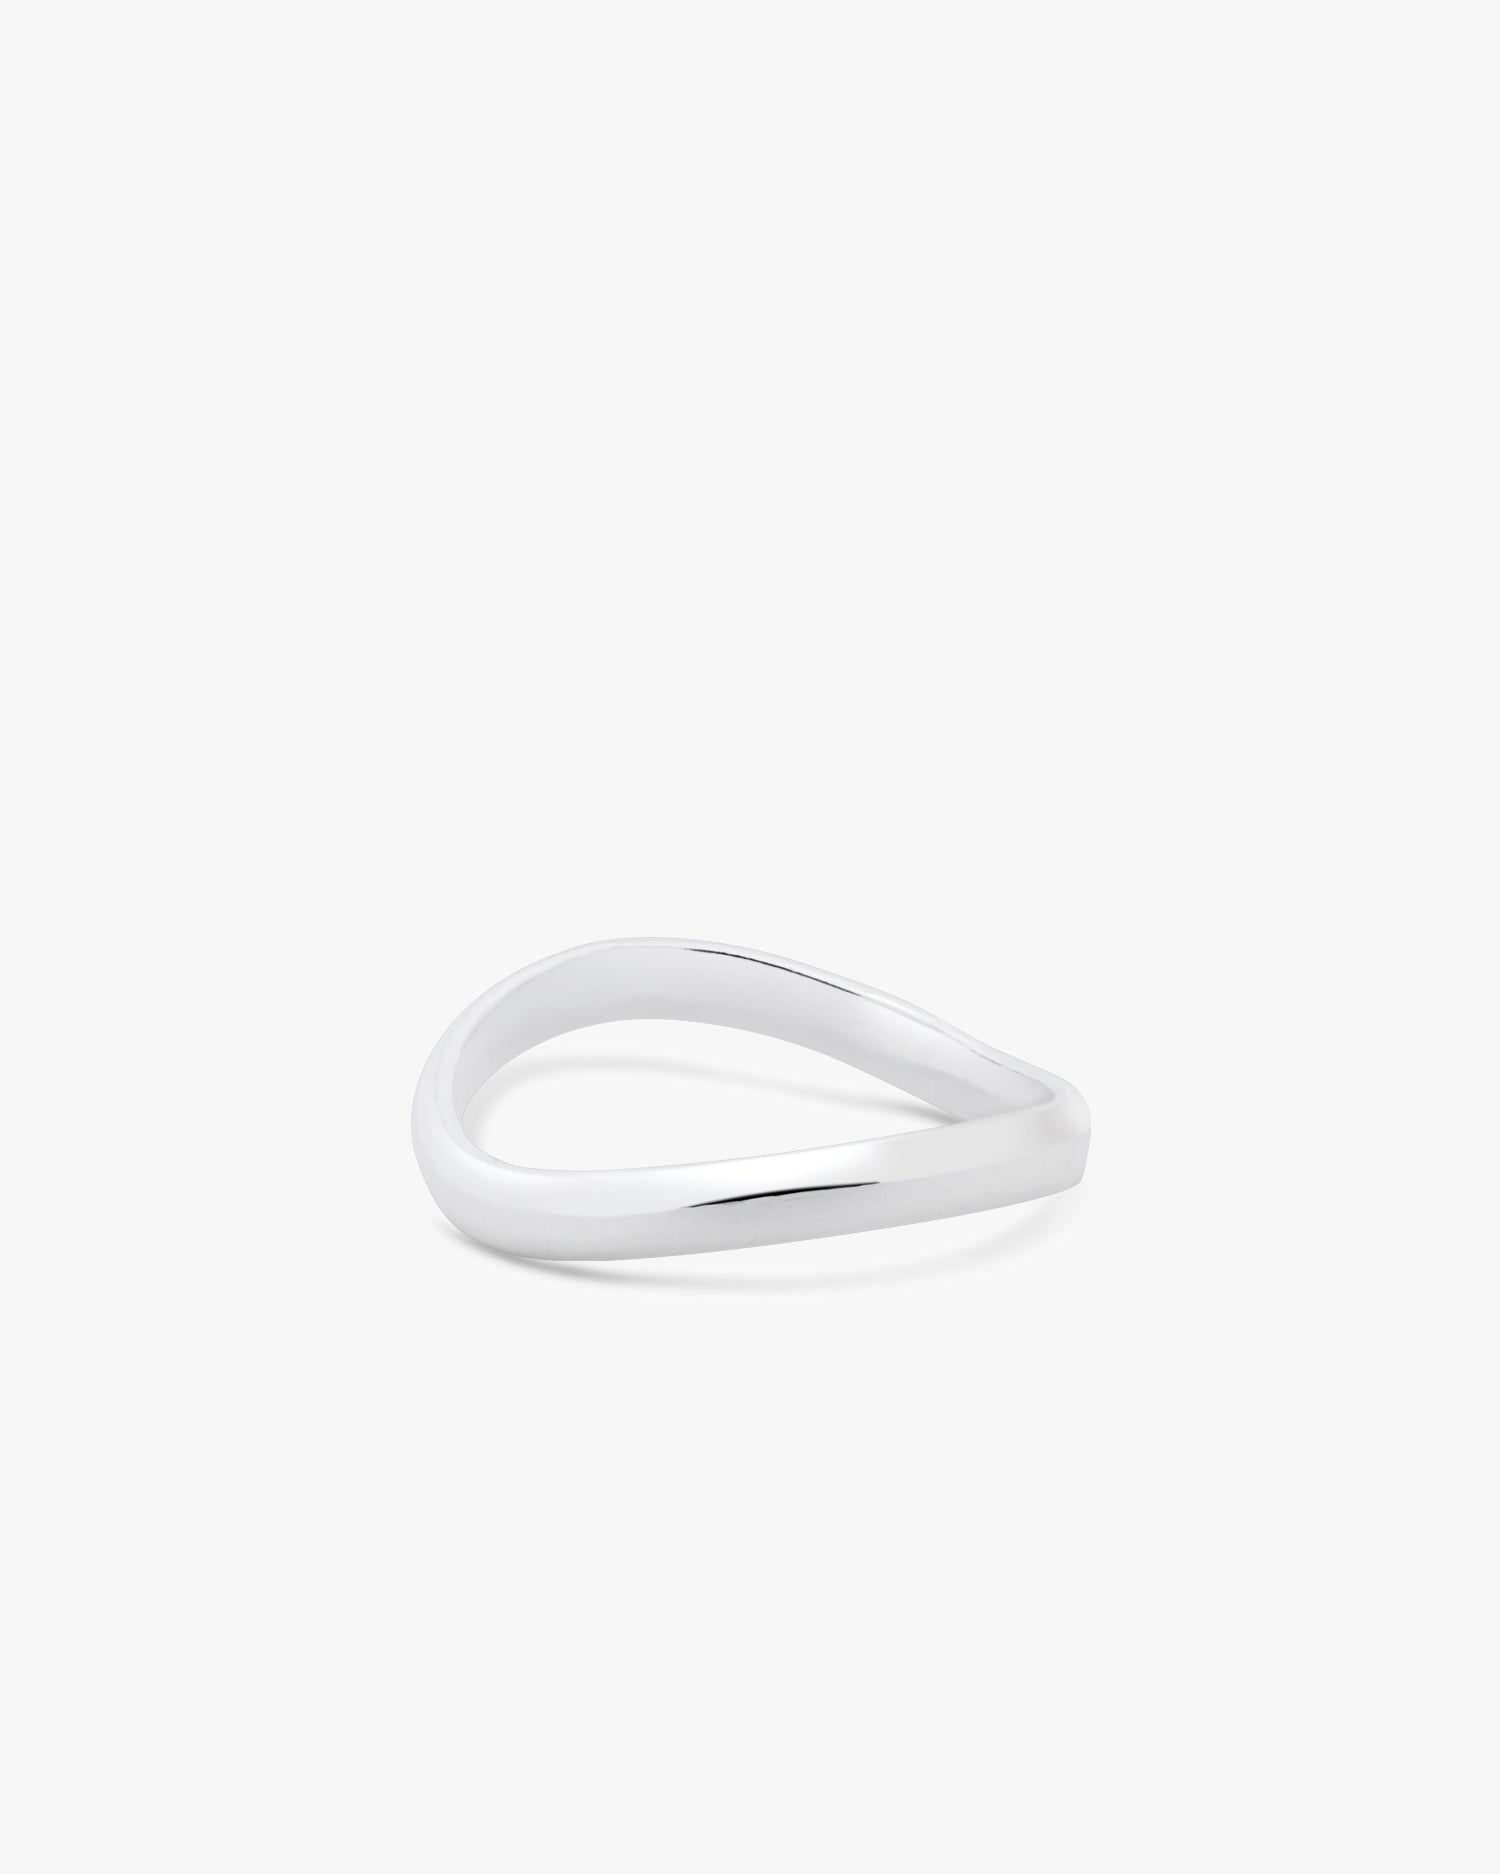 Genuine 925 Sterling Silver Half Chain Band Ring, Chain Ring